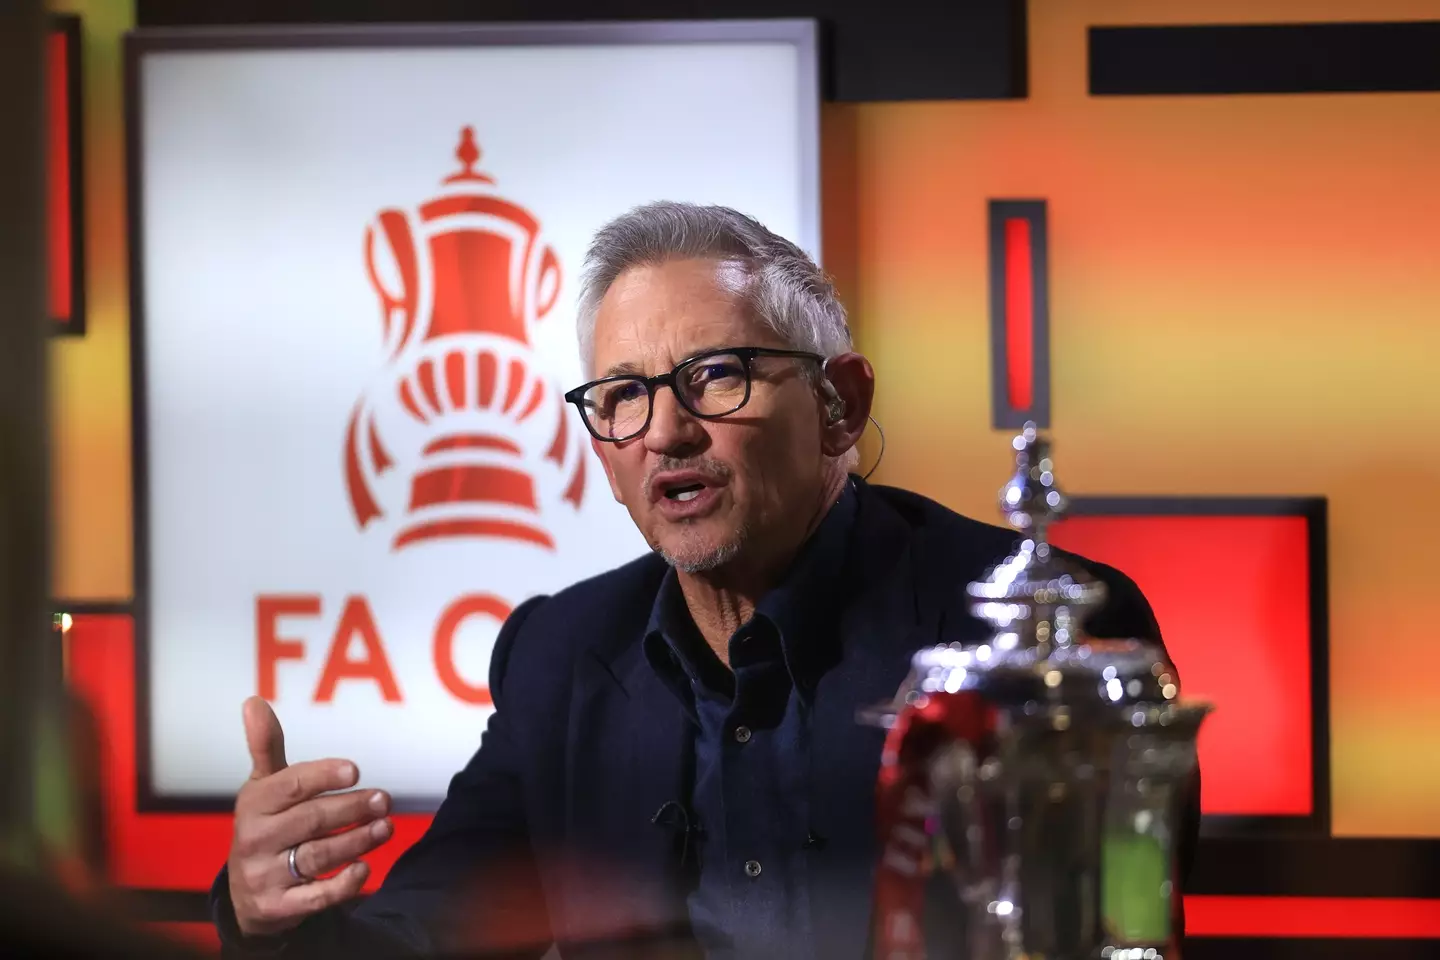 Gary Lineker during the broadcast of a FA Cup tie on the BBC. Image: Getty 